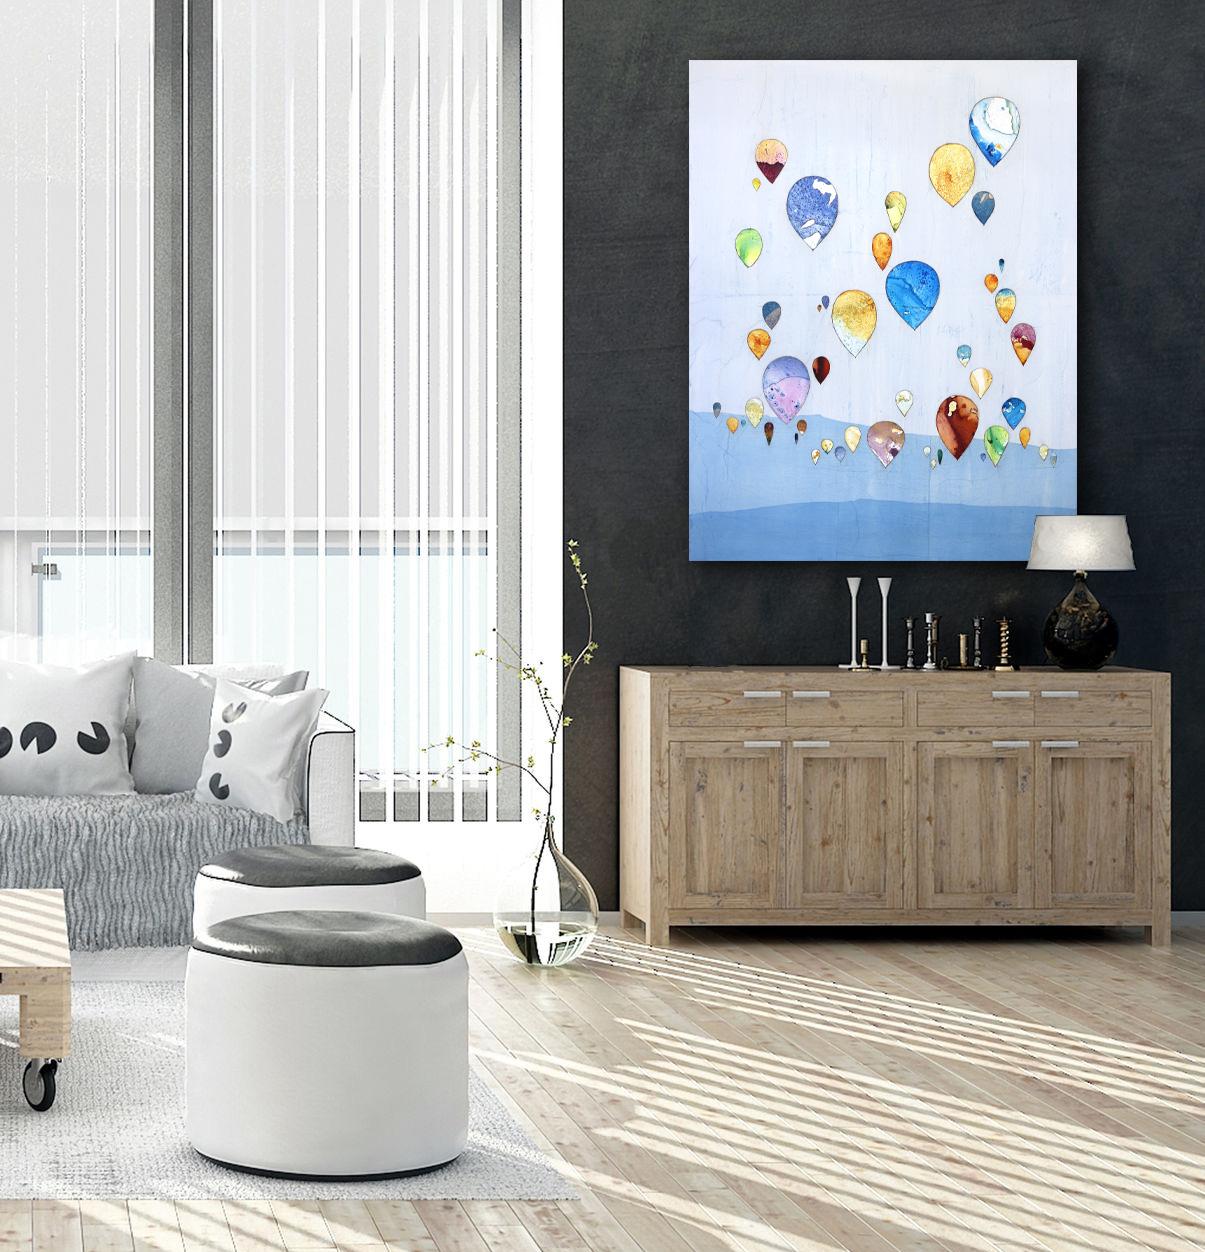 With Flying Colors - Large Original Boho Minimalist Landscape Balloon Artwork - Contemporary Painting by Peter Kuttner